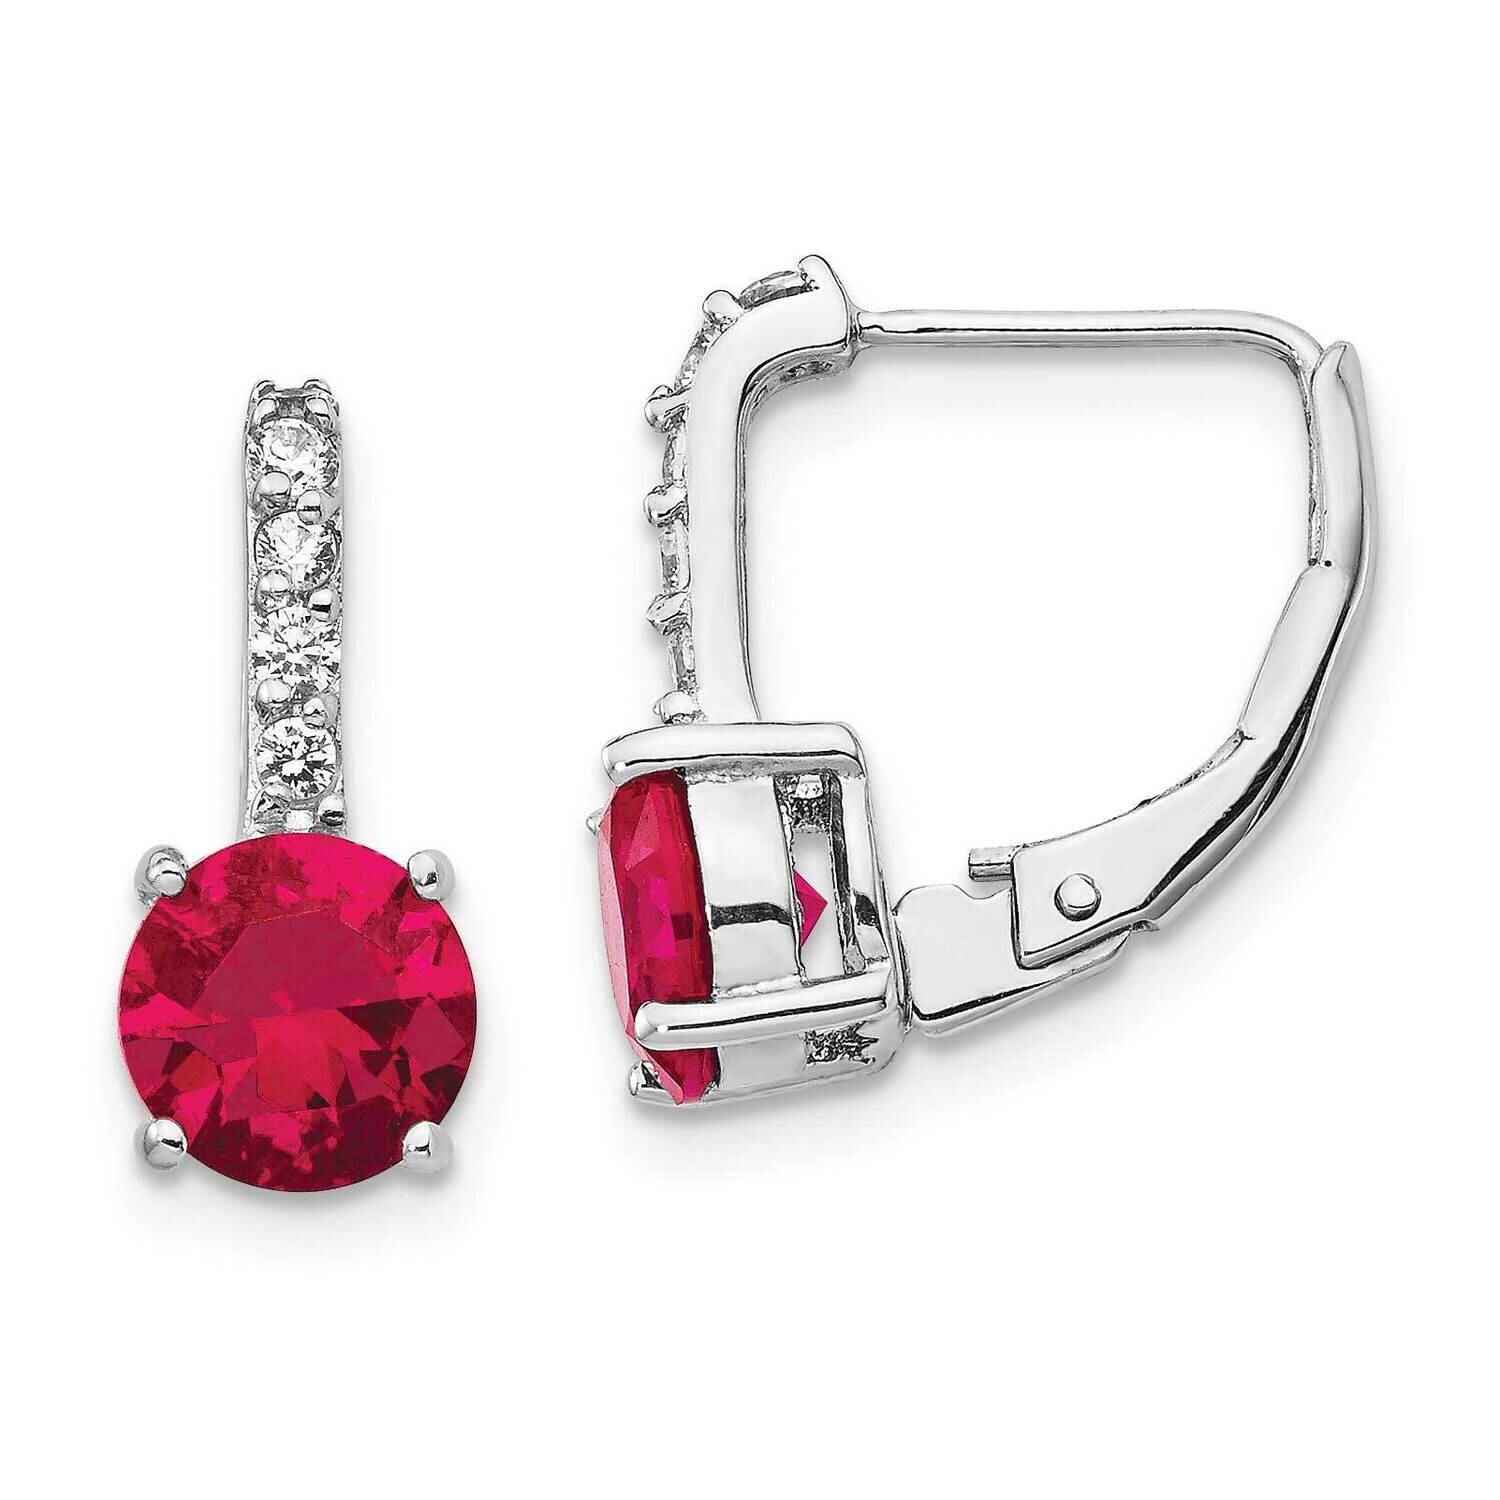 CZ Diamond &amp; Created Ruby Leverback Earrings Sterling Silver Rhodium Plated QCM1402